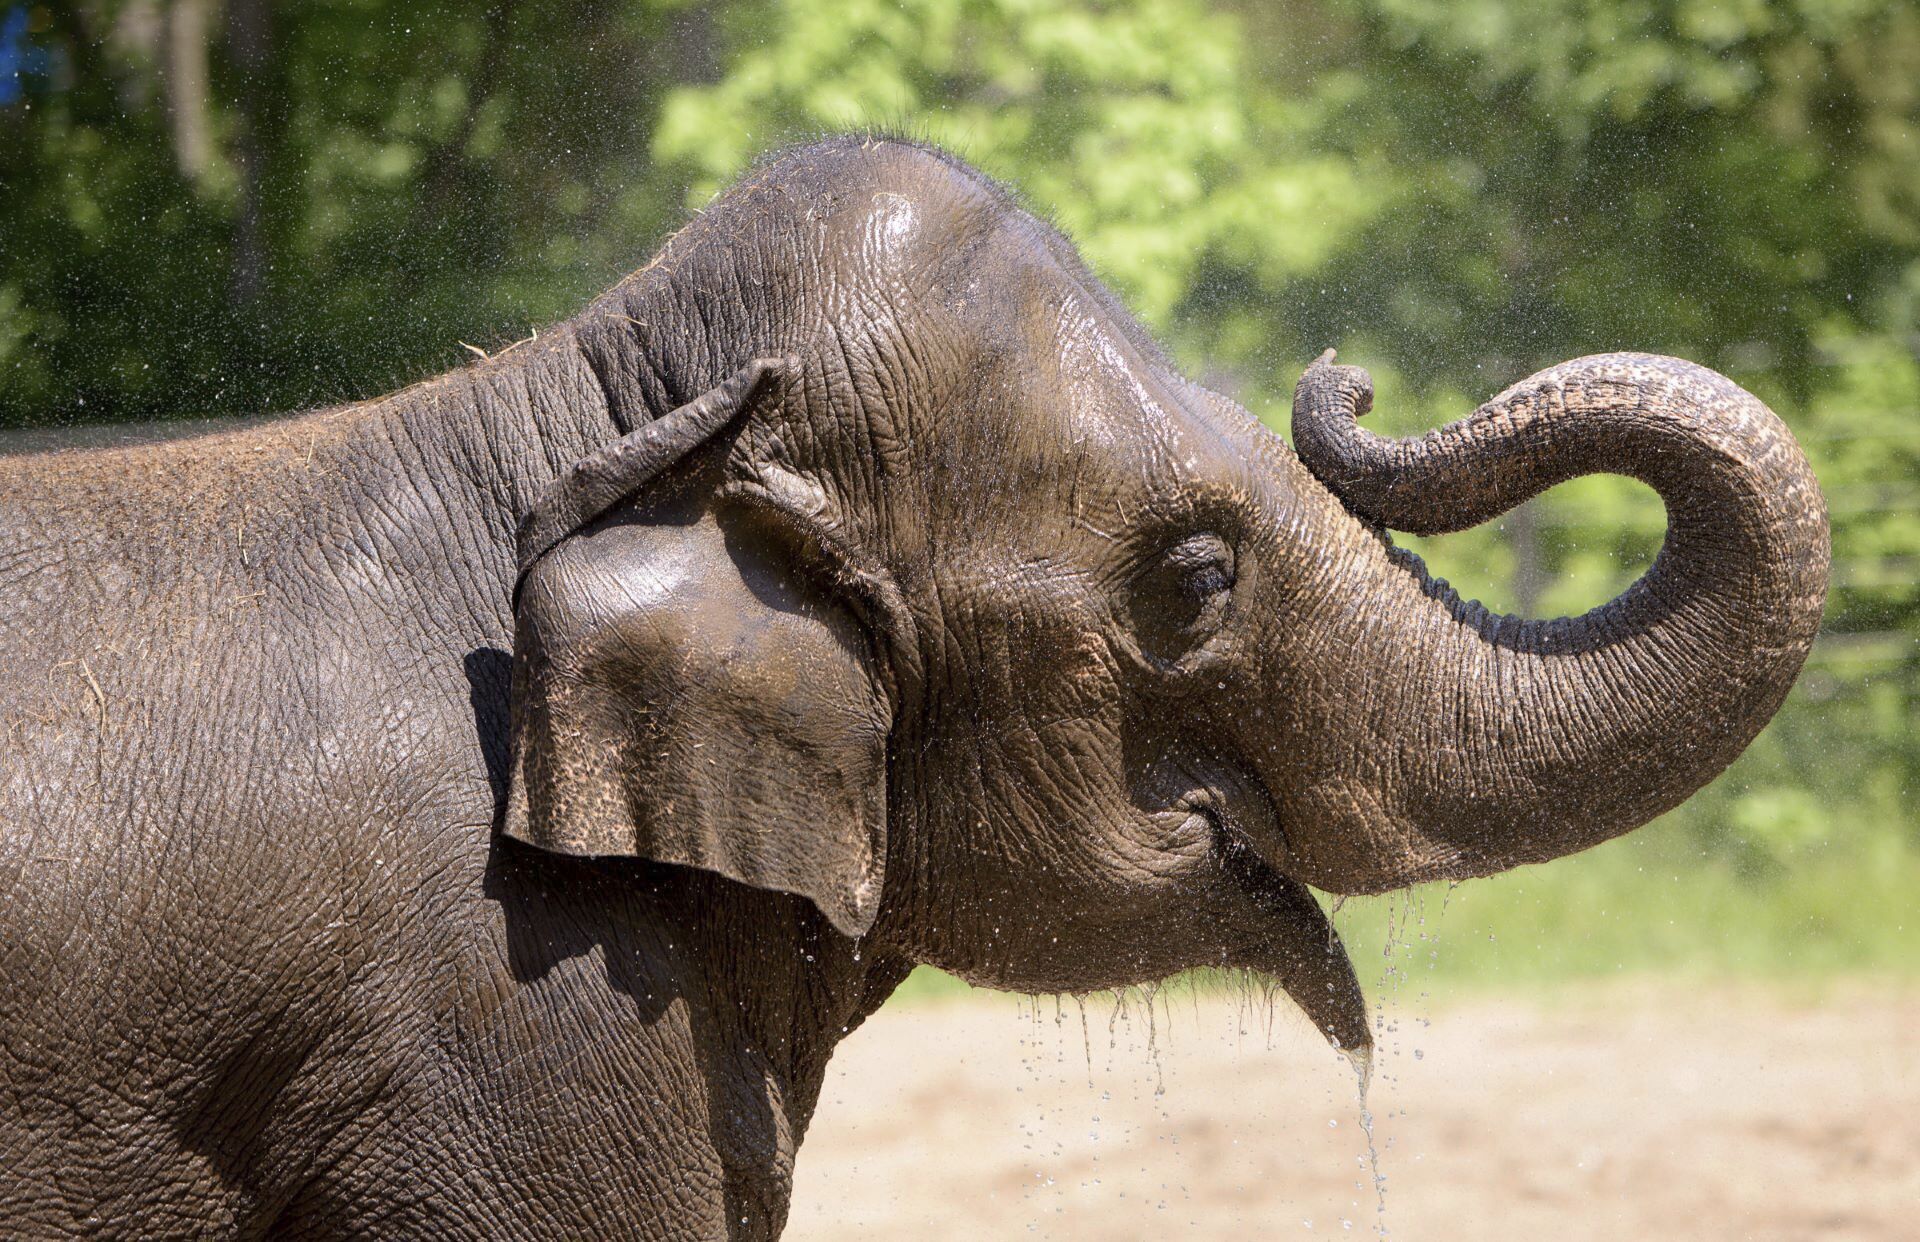 Rani drinks water in an outdoor area in 2017 at the Saint Louis Zoo, in St. Louis, Mo....